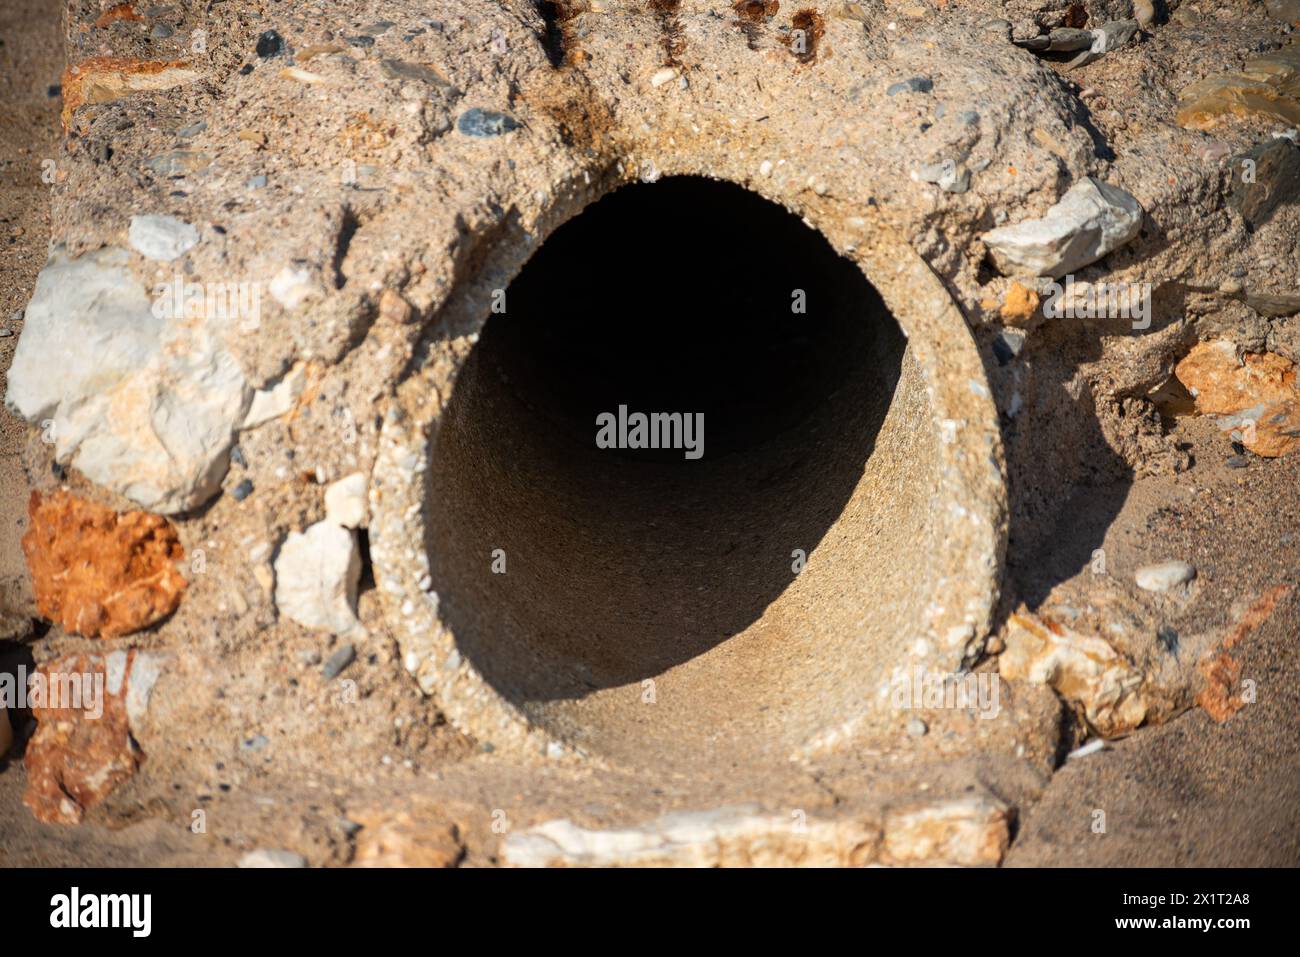 Discover the hidden infrastructure beneath the sands—a big concrete pipe silently serving its purpose underground. Stock Photo